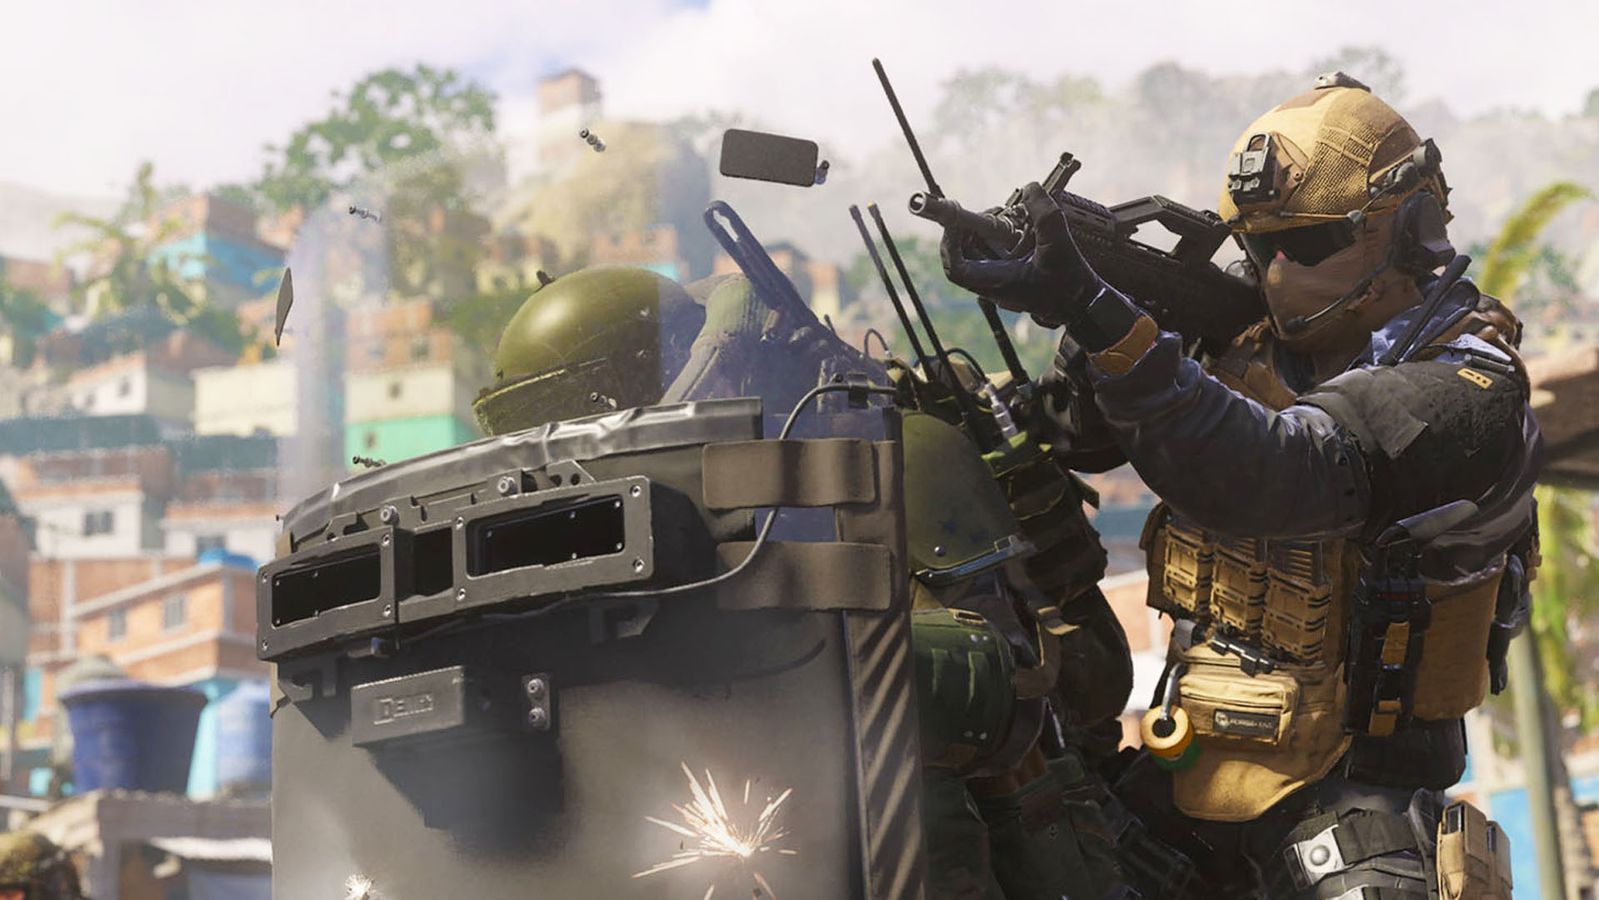 Modern Warfare 3 player taking cover behind riot shield and player firing assault rifle behind them